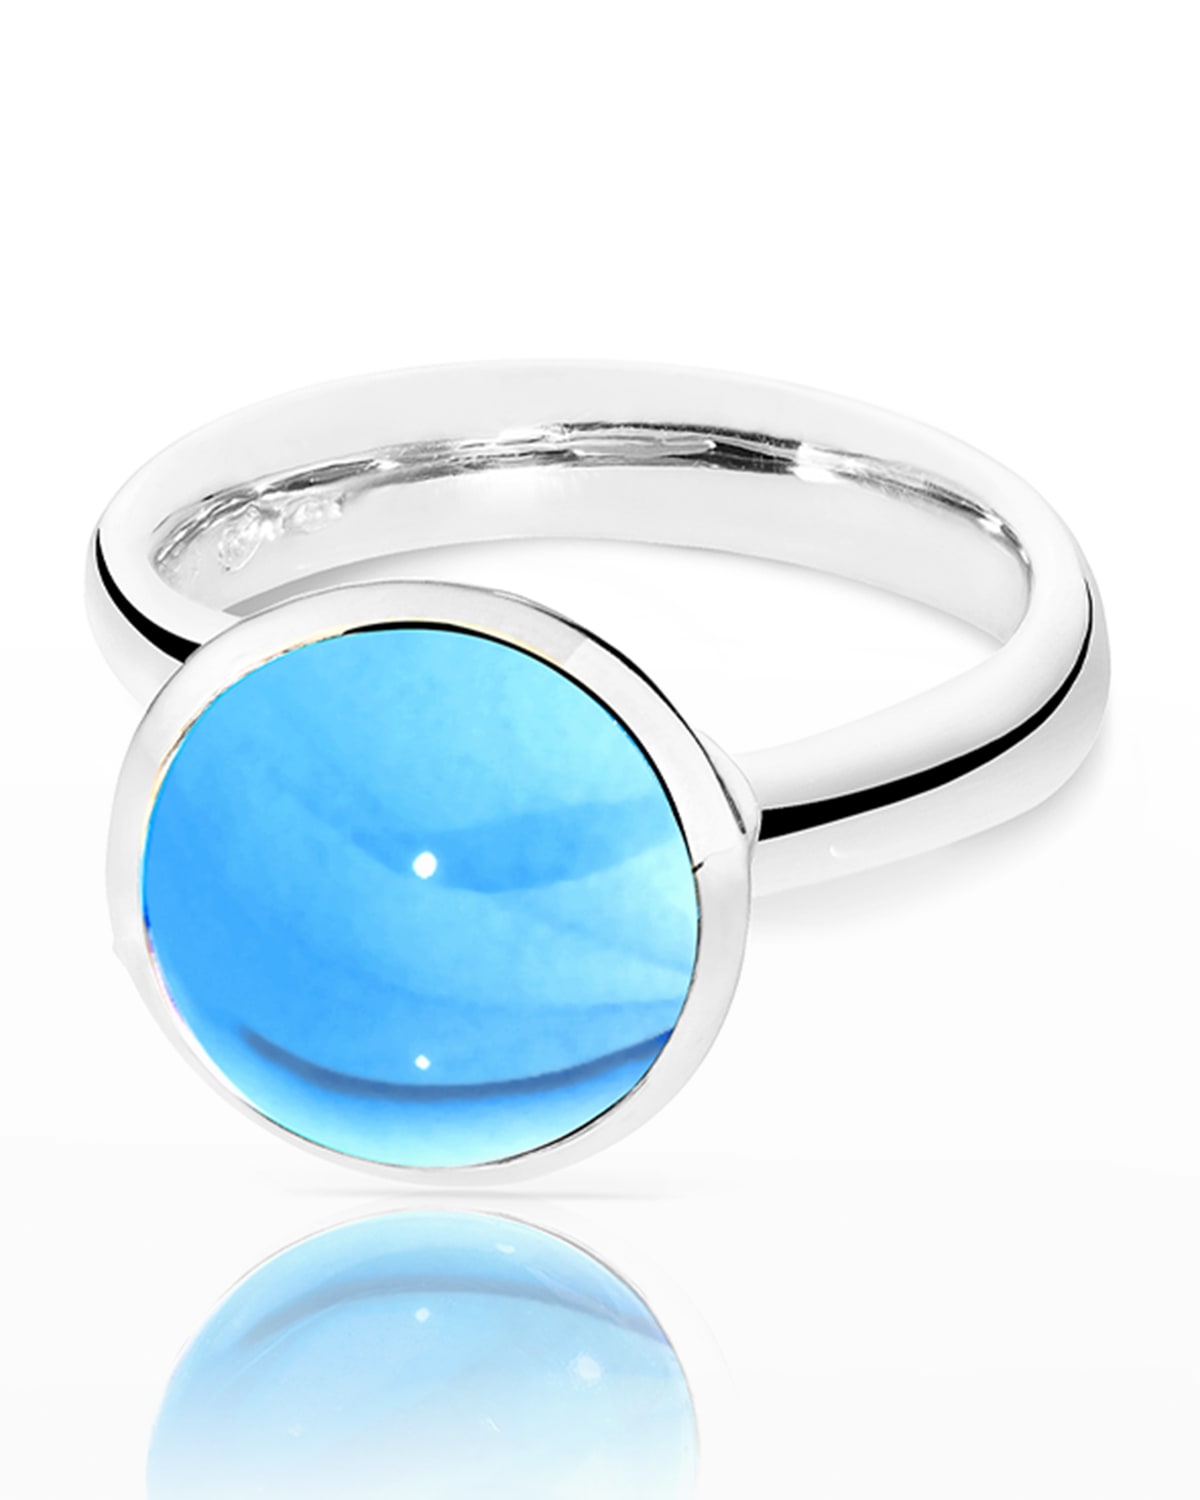 Bouton 11mm Swiss Blue Topaz Cabochon Ring in 18k White Gold, Size 7